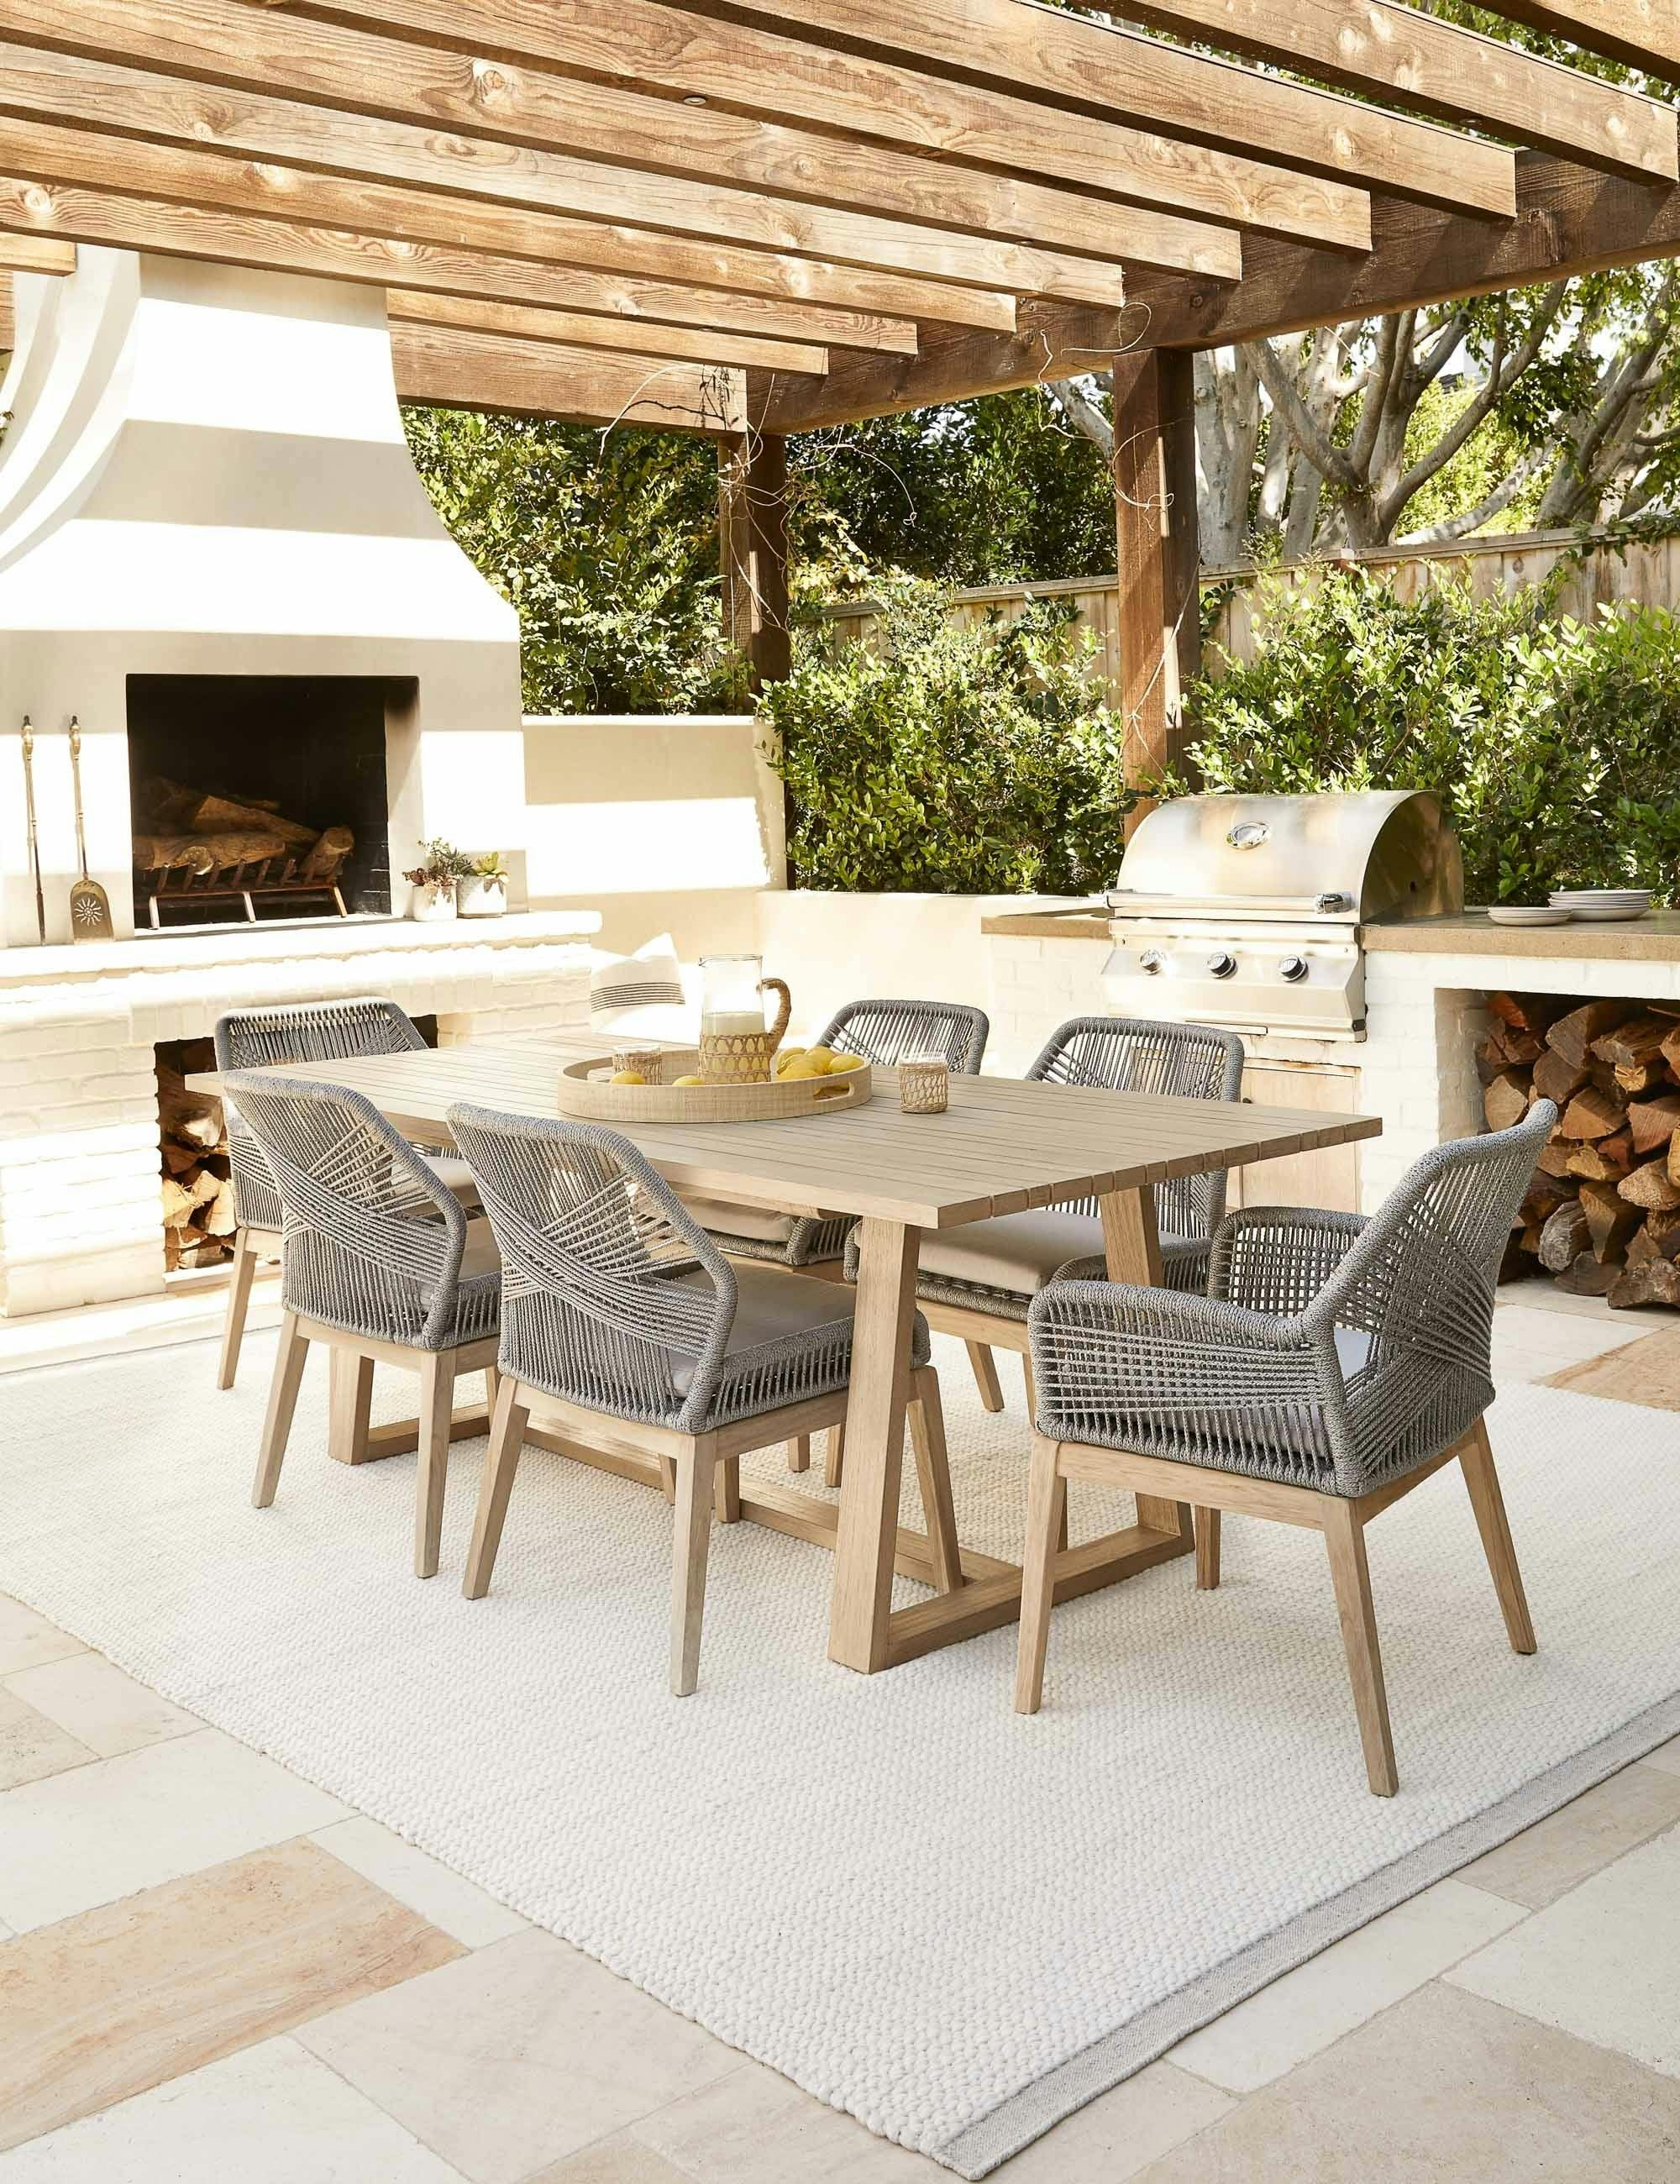 Modern Geometric Platinum Gray Outdoor Dining Chair with Cushions